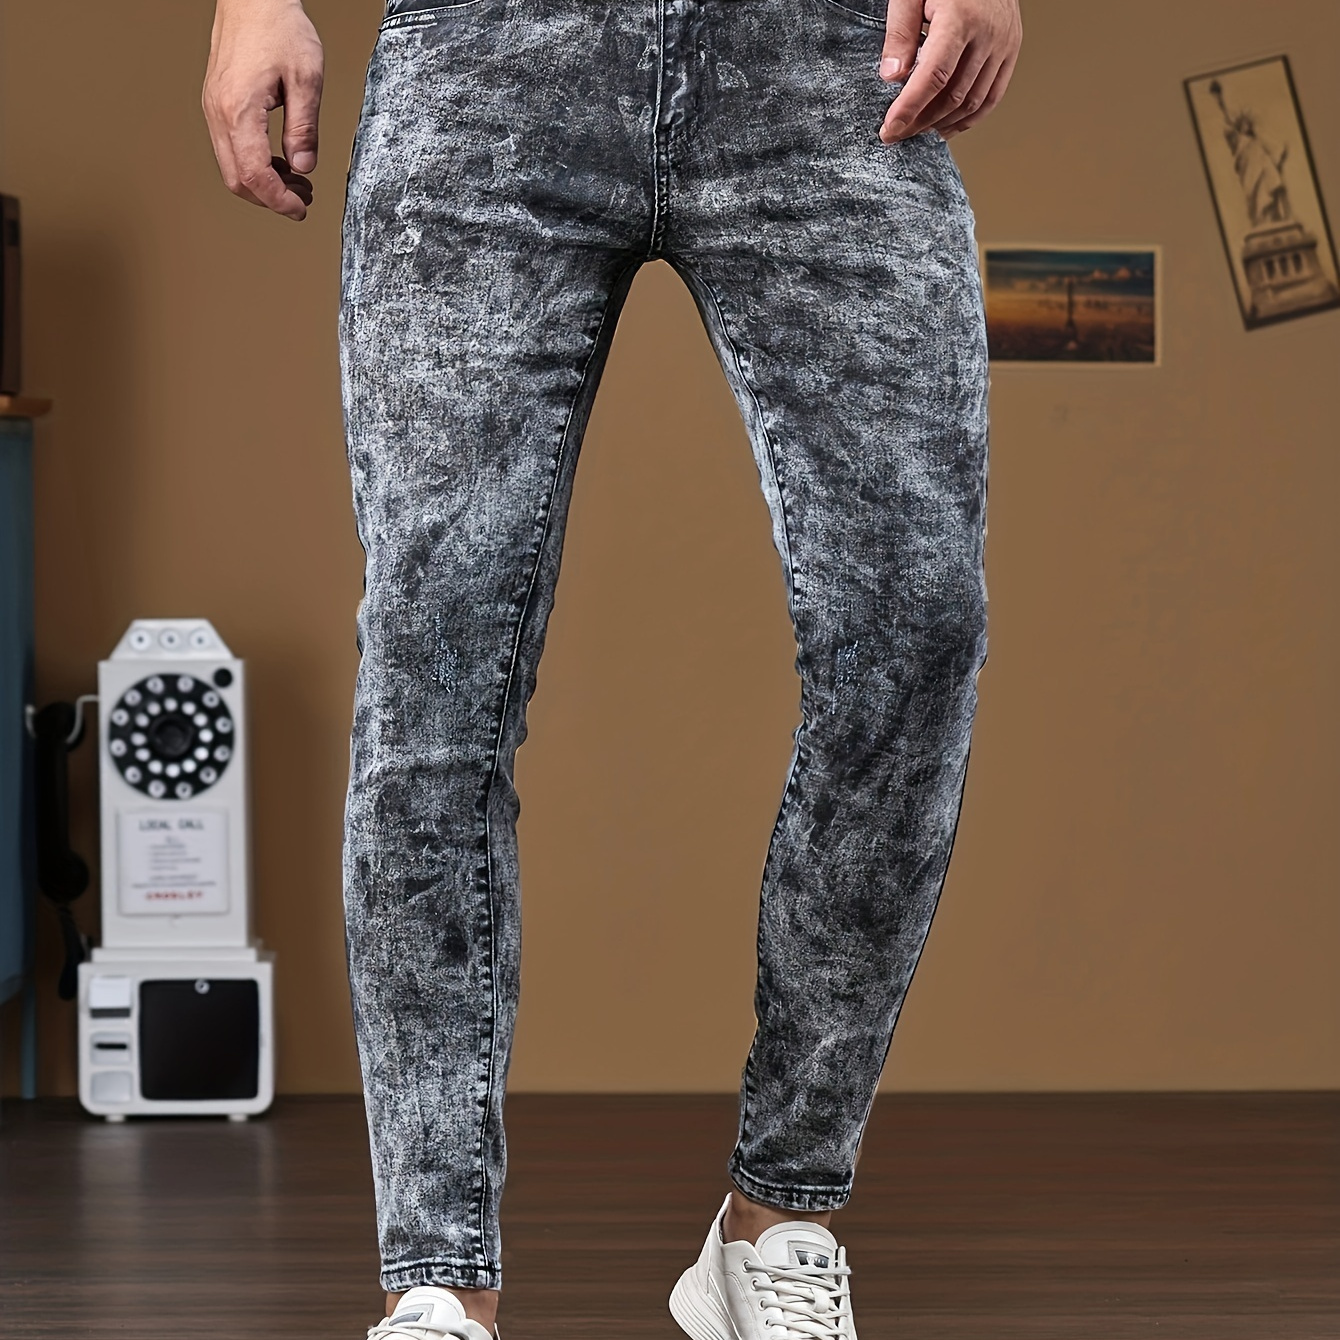 

Men's Chic Skinny Jeans, Men's Casual Street Style Distressed Stretch Denim Pants